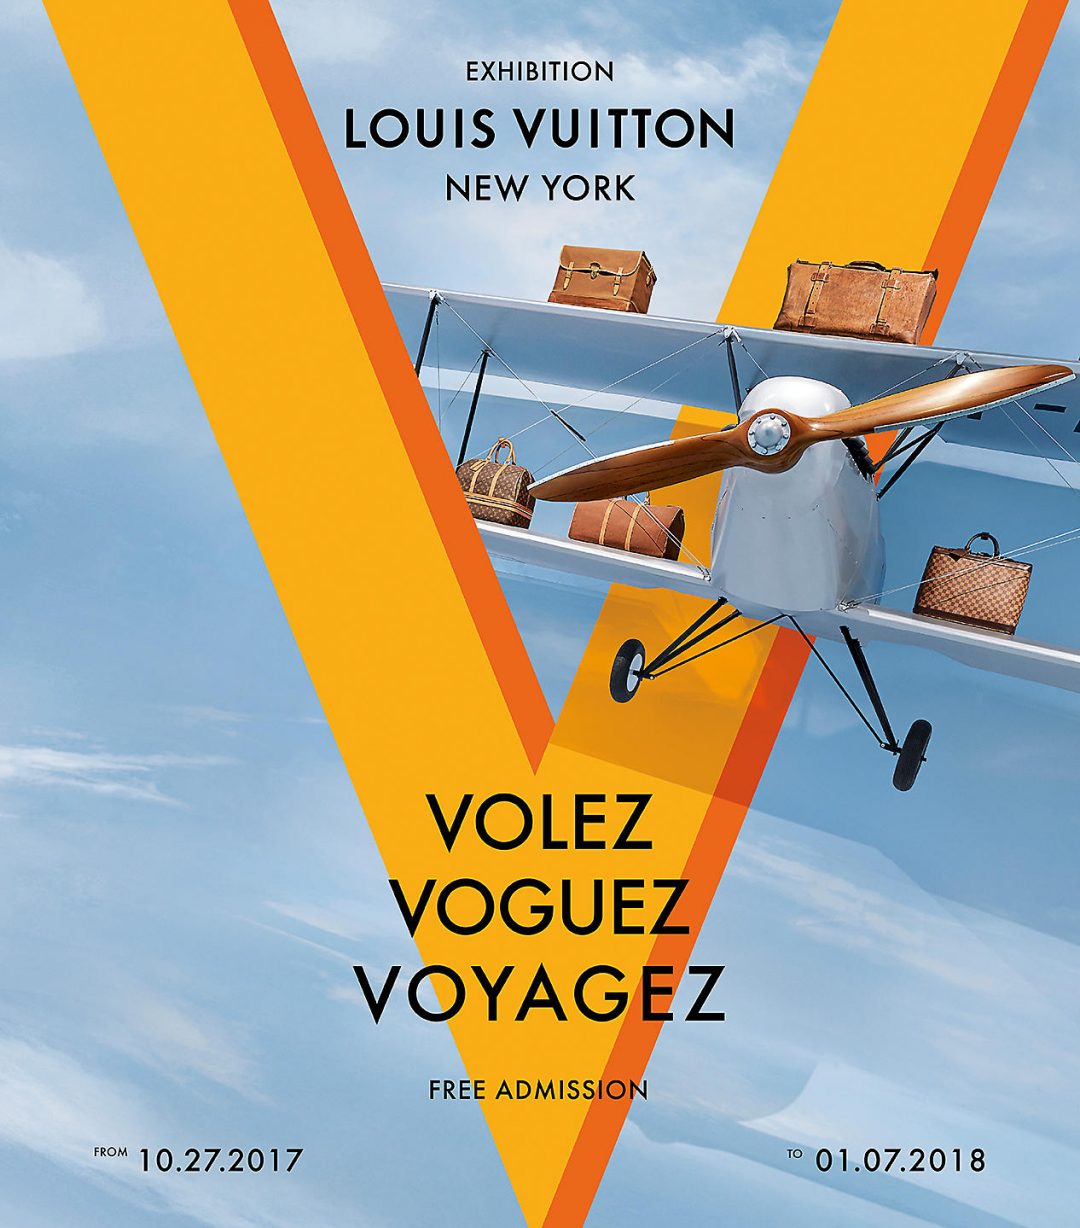 Louis Vuitton captures the retro allure of jet travel in its